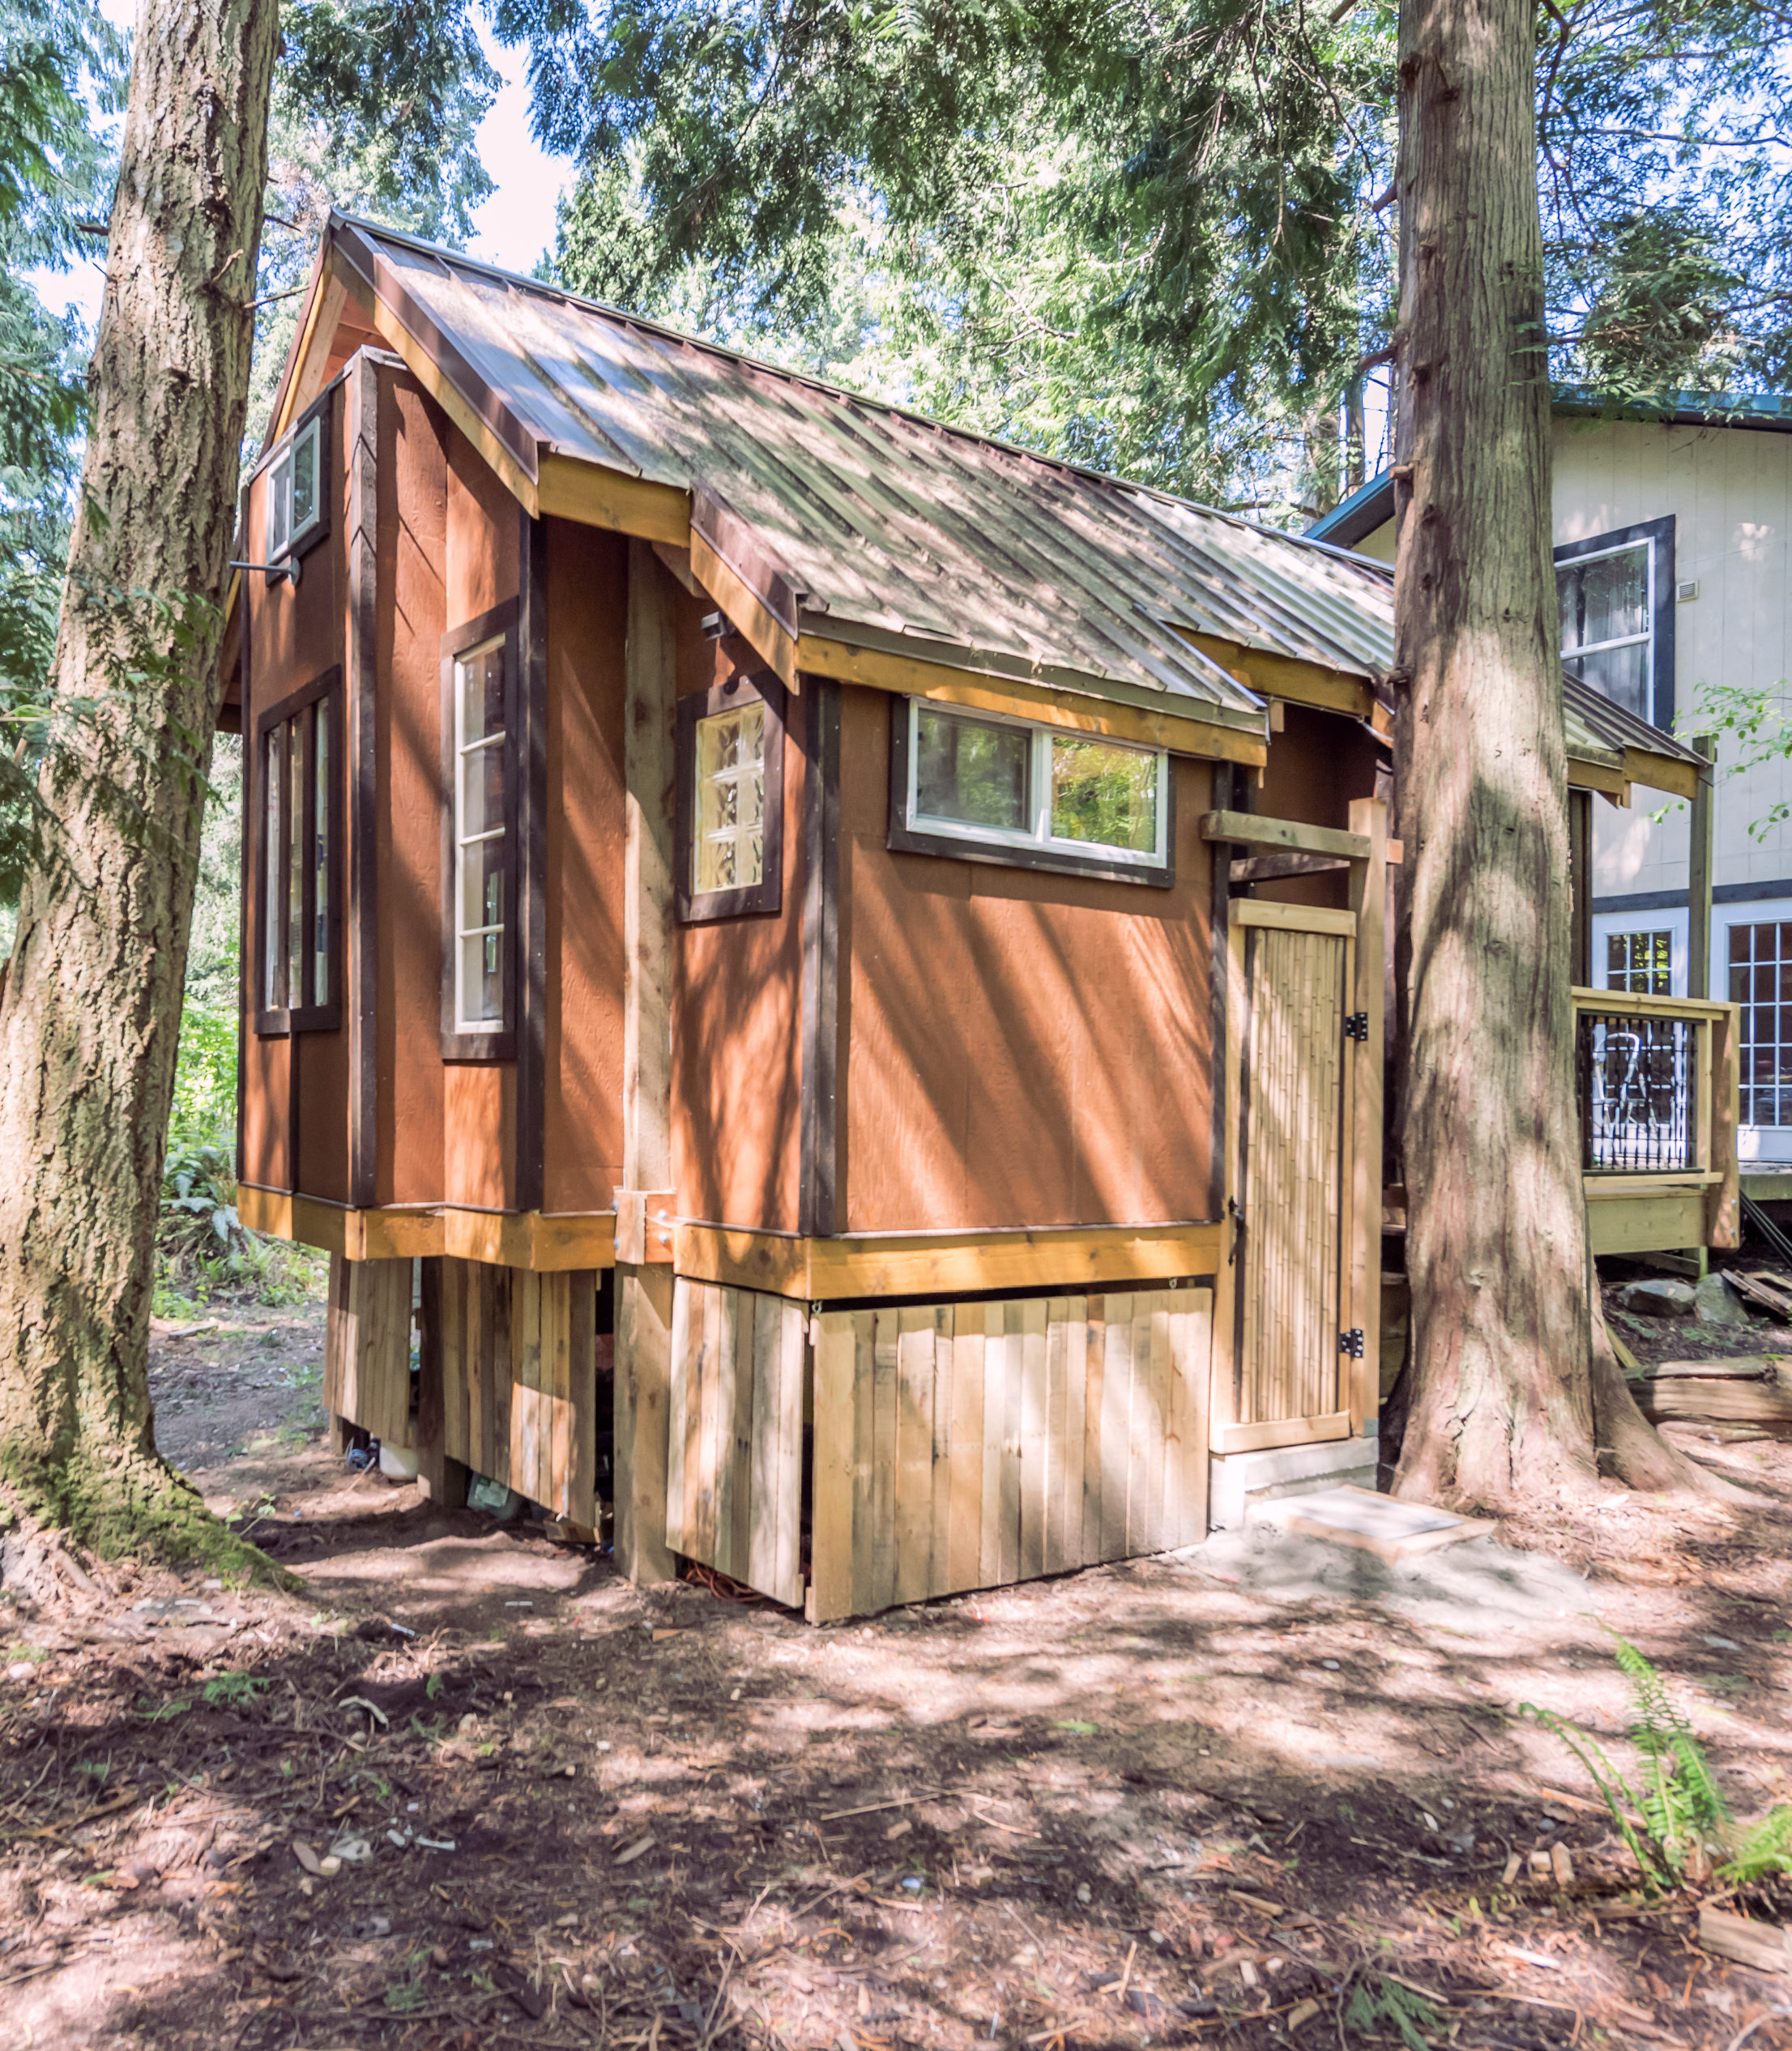 The Treehouse cottage offers the ultimate in holiday rentals